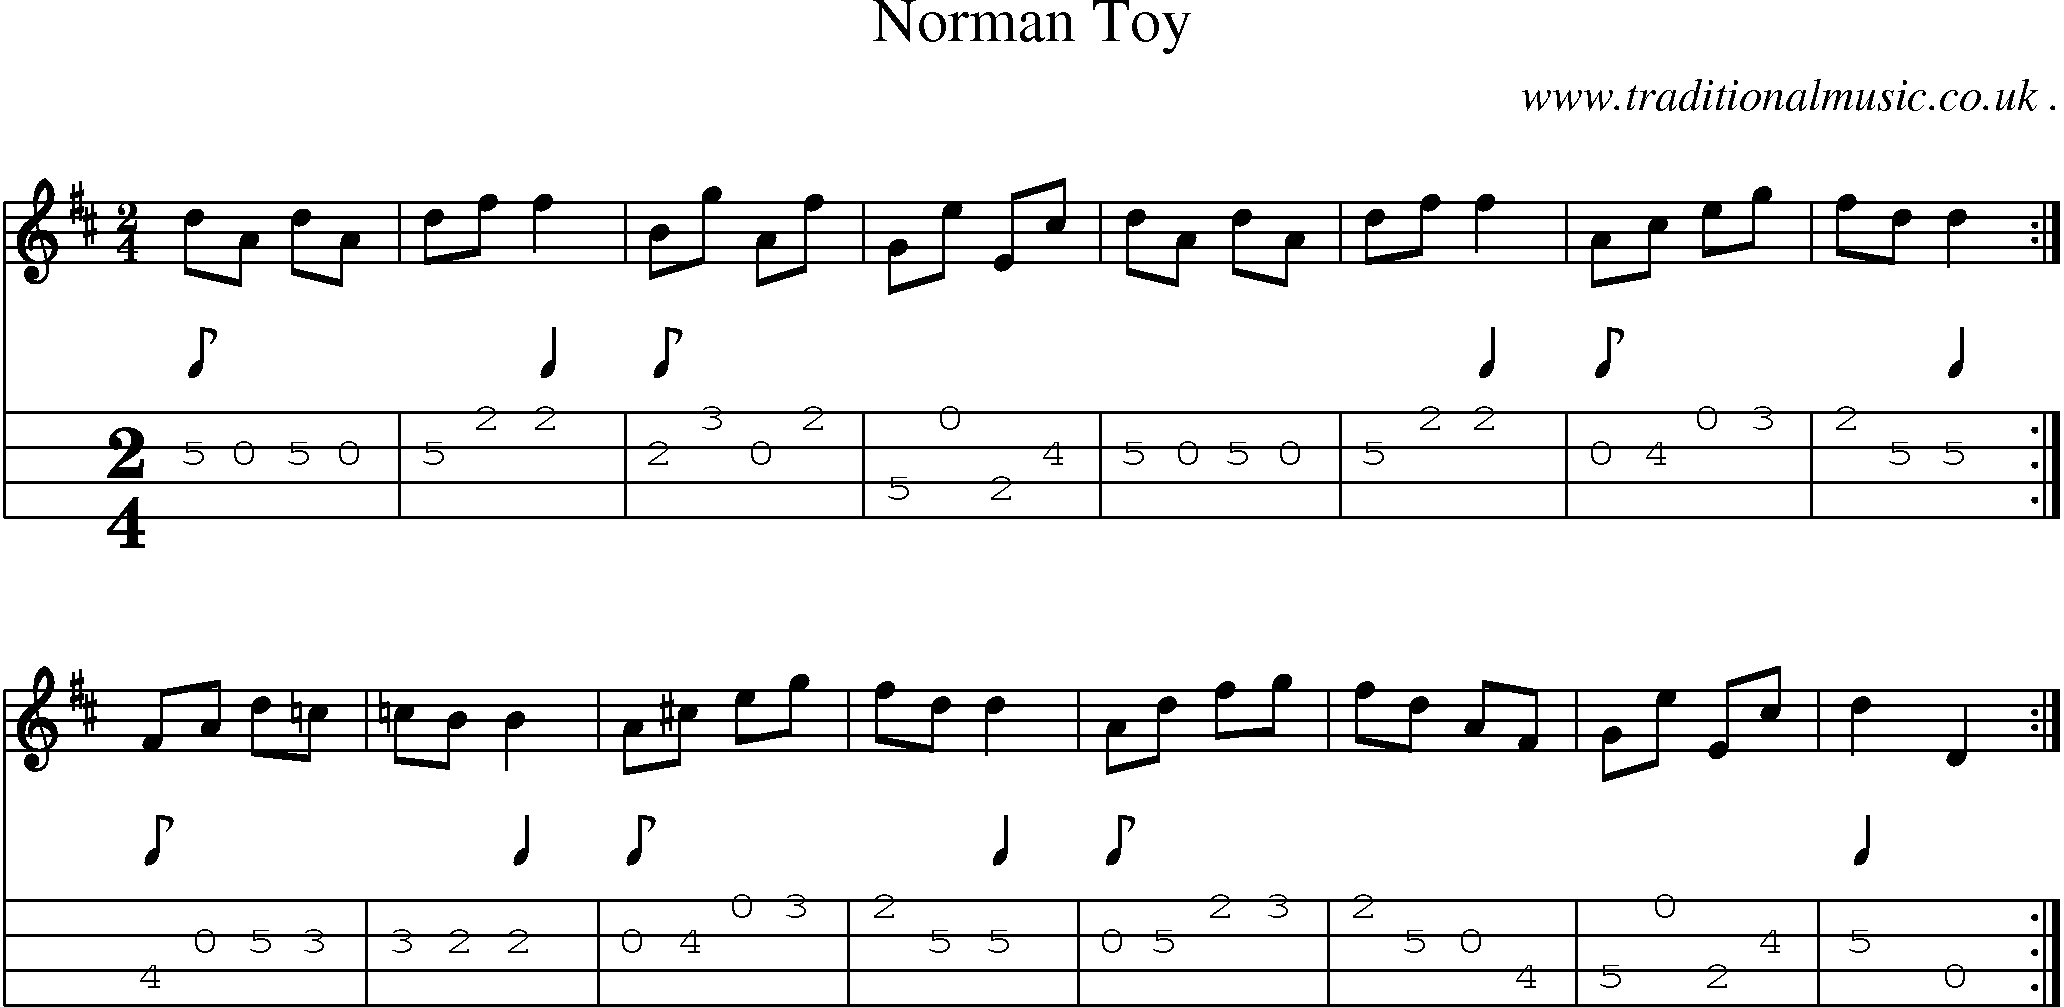 Music Score and Mandolin Tabs for Norman Toy